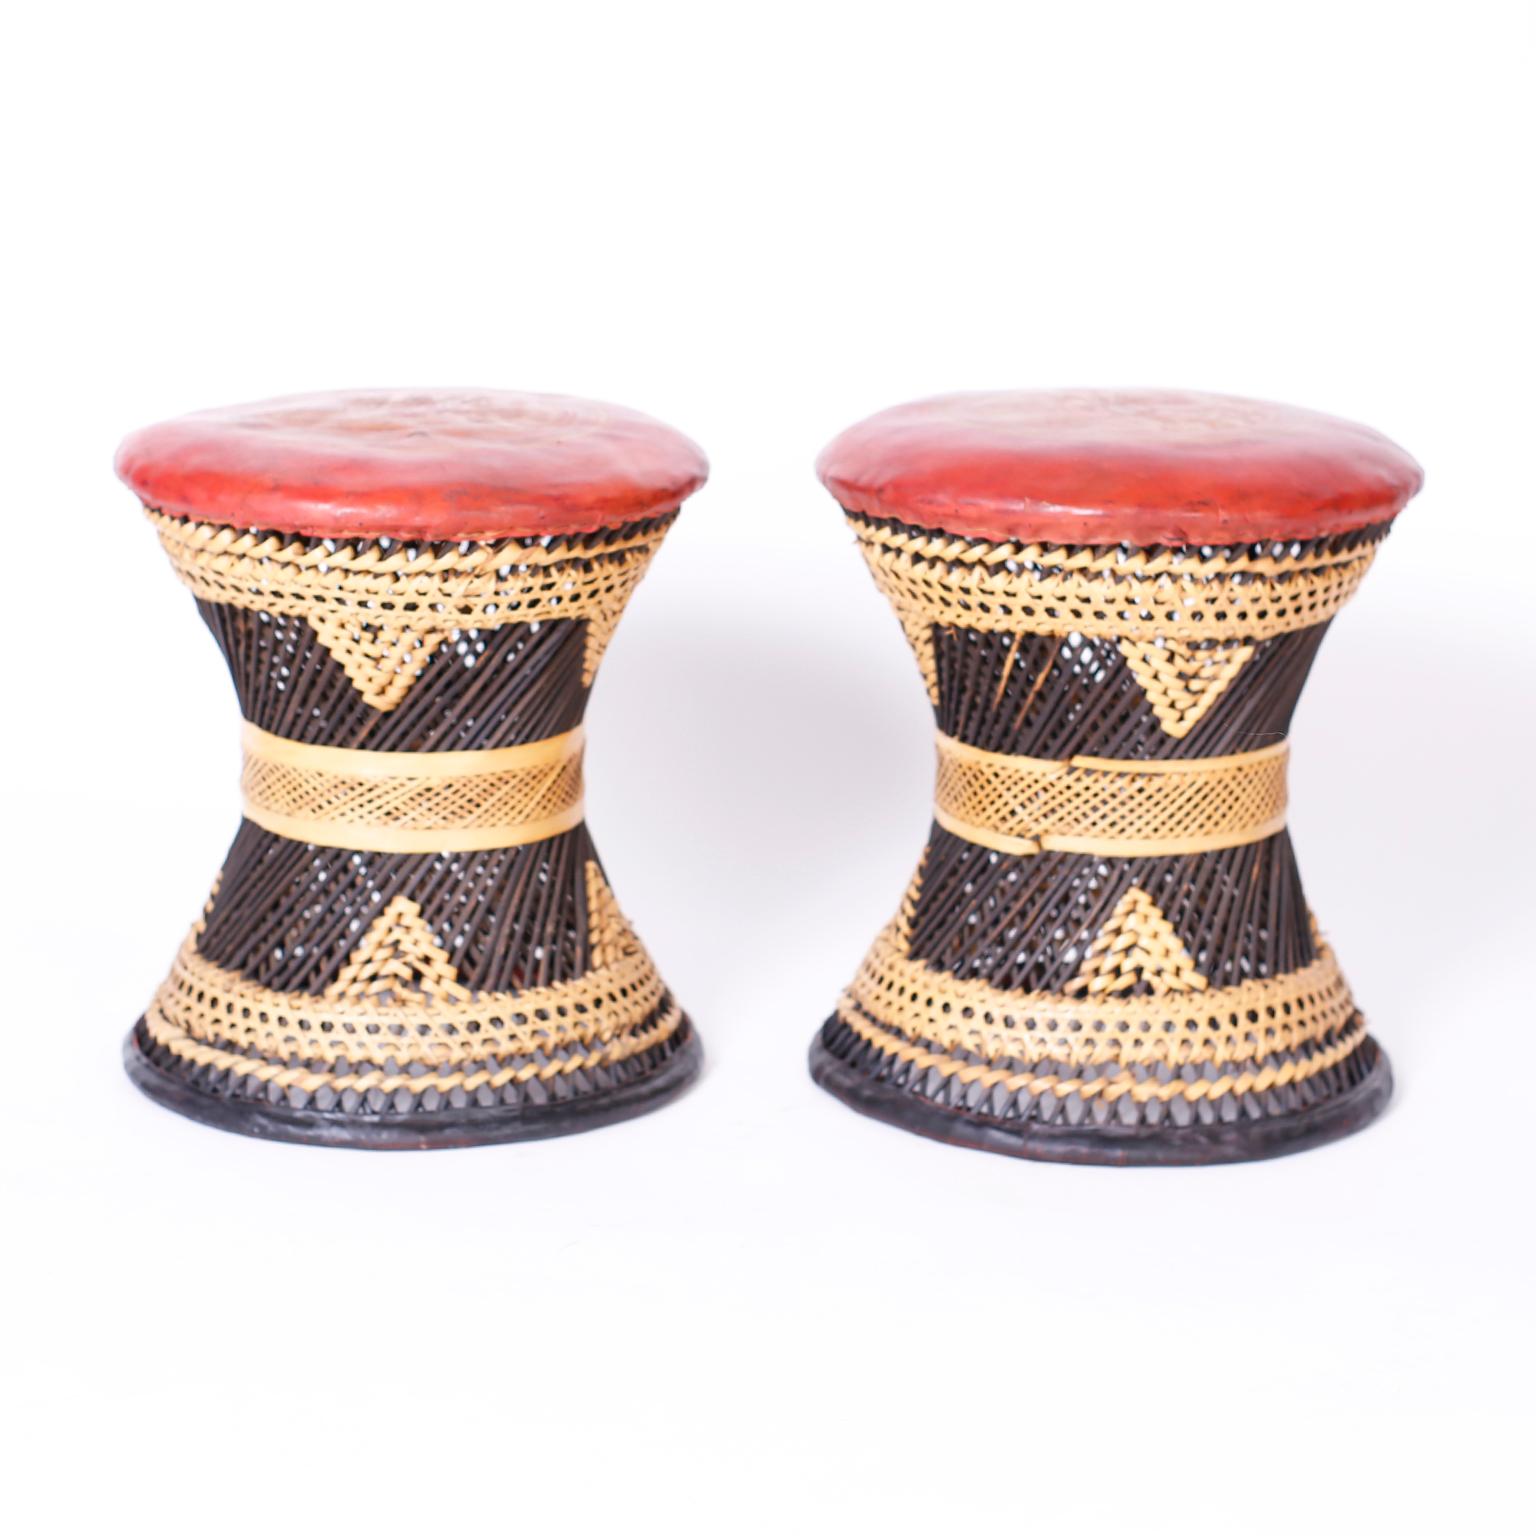 Pair of ottomans with soft oxblood leather tops embossed with classical scenes over hourglass form wicker bases.